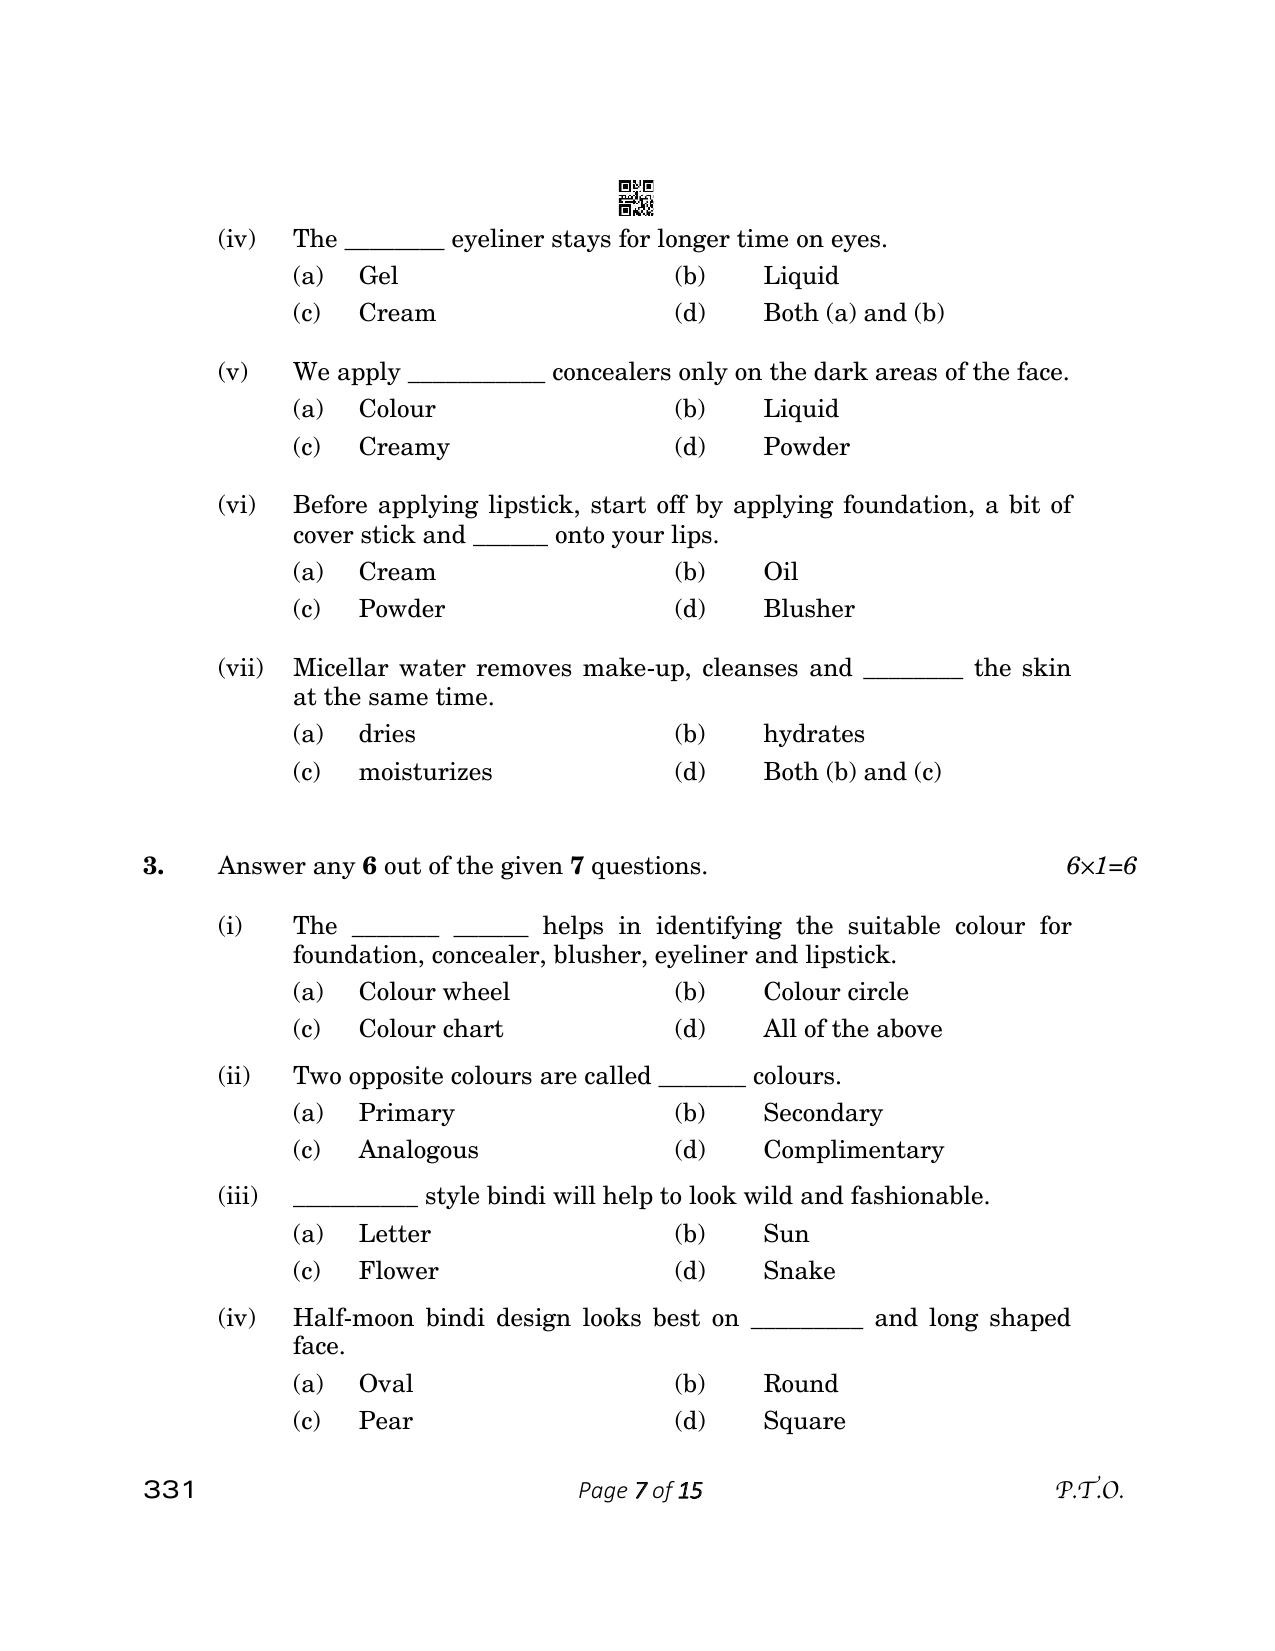 CBSE Class 12 331 Beauty And Wellness 2023 Question Paper - Page 7